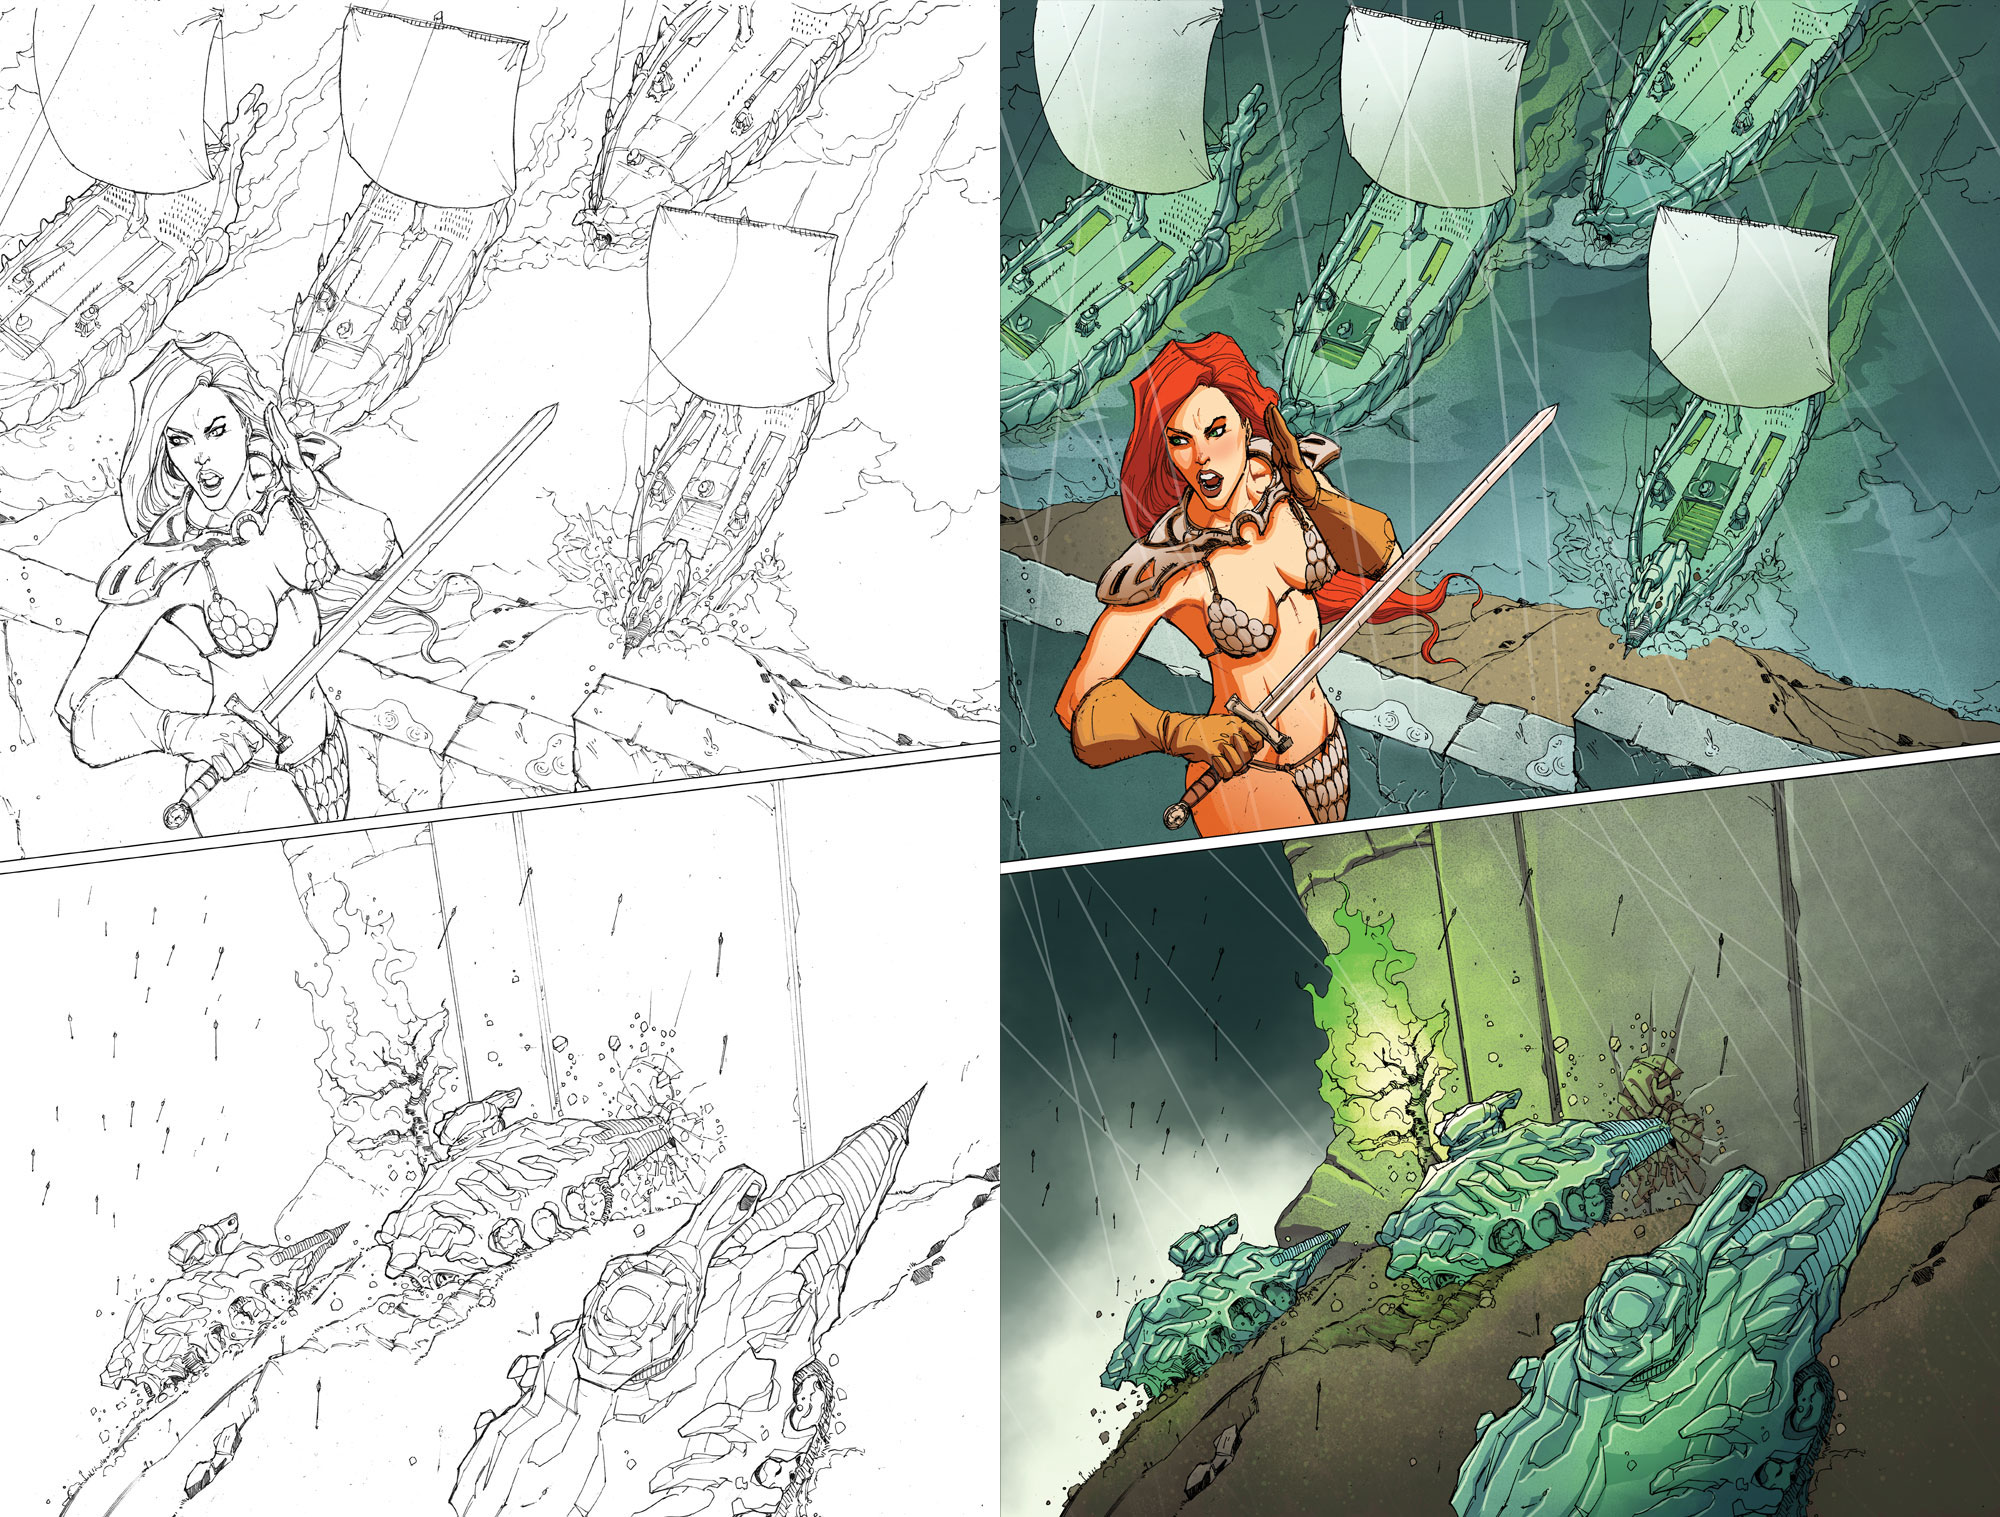 red_sonja_atlantis_rises_issue_2__page_1_by_max_dunbar-d5f477r